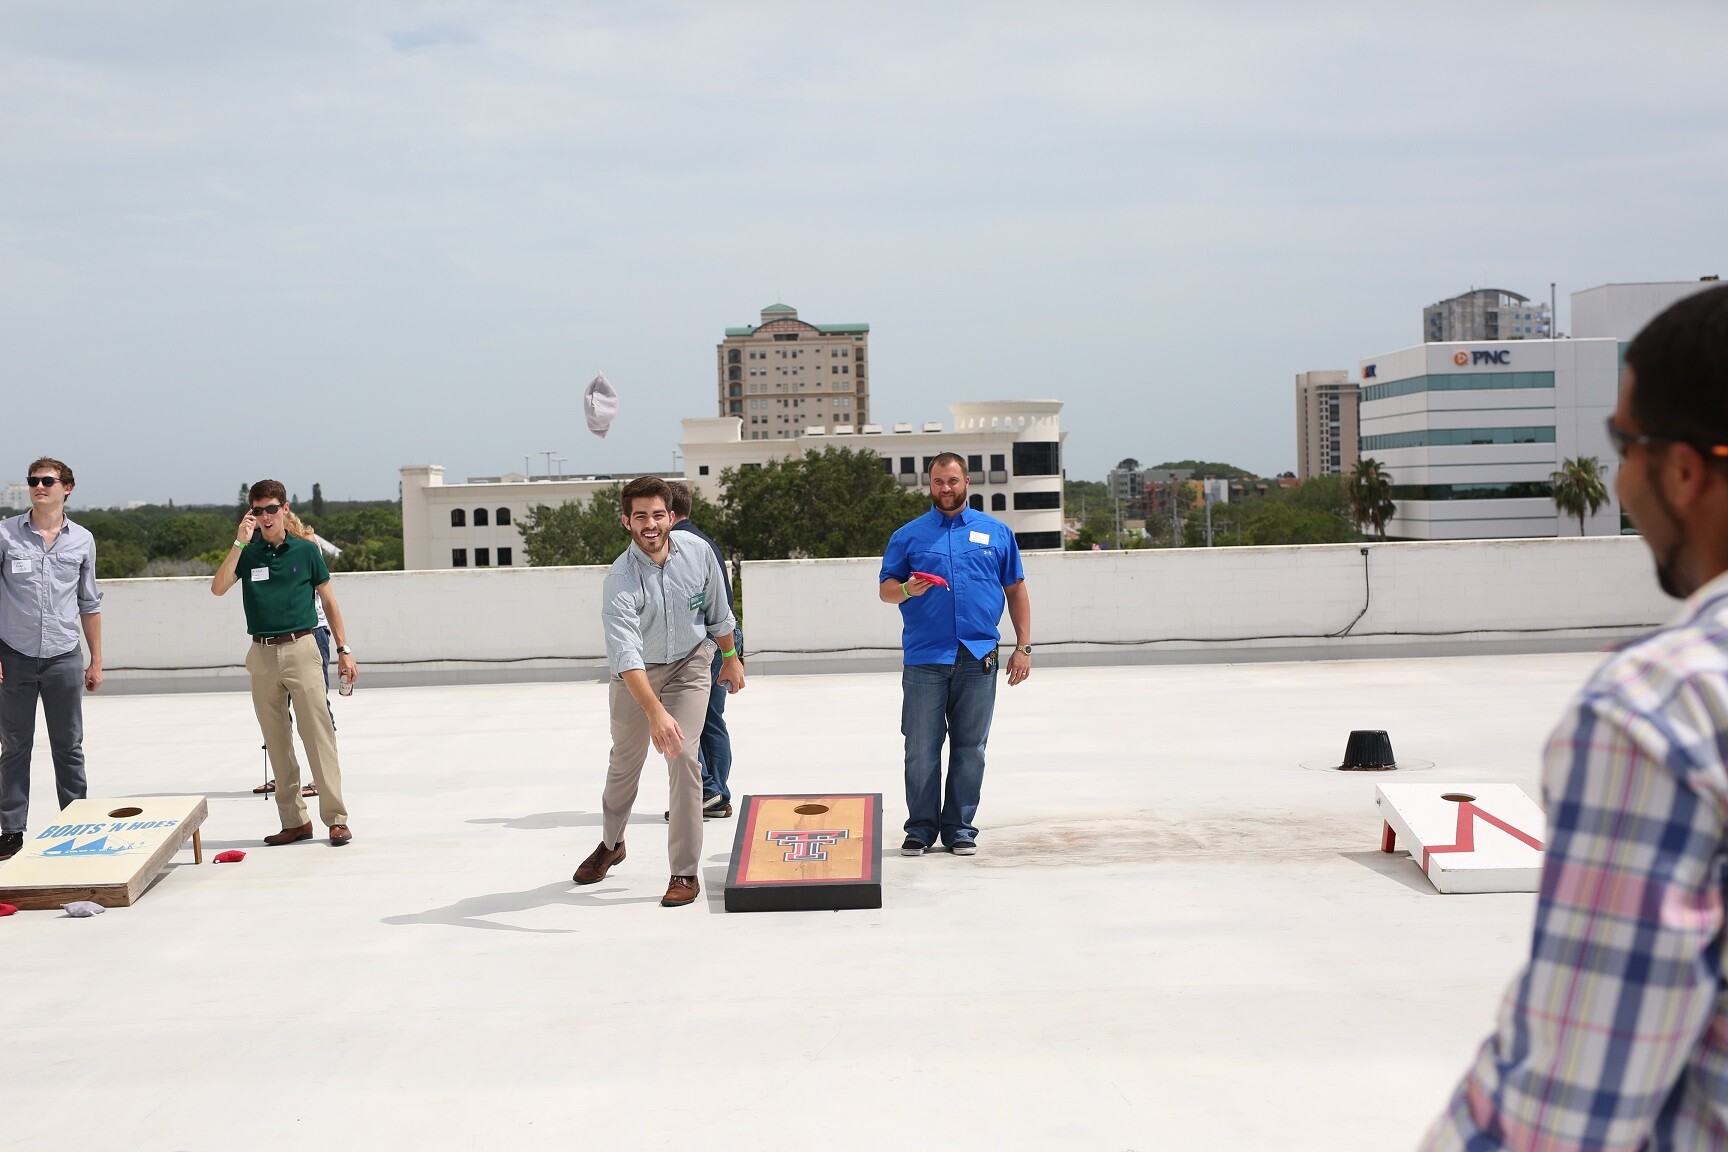 S-One Rooftop Event Brings Area Interns Together